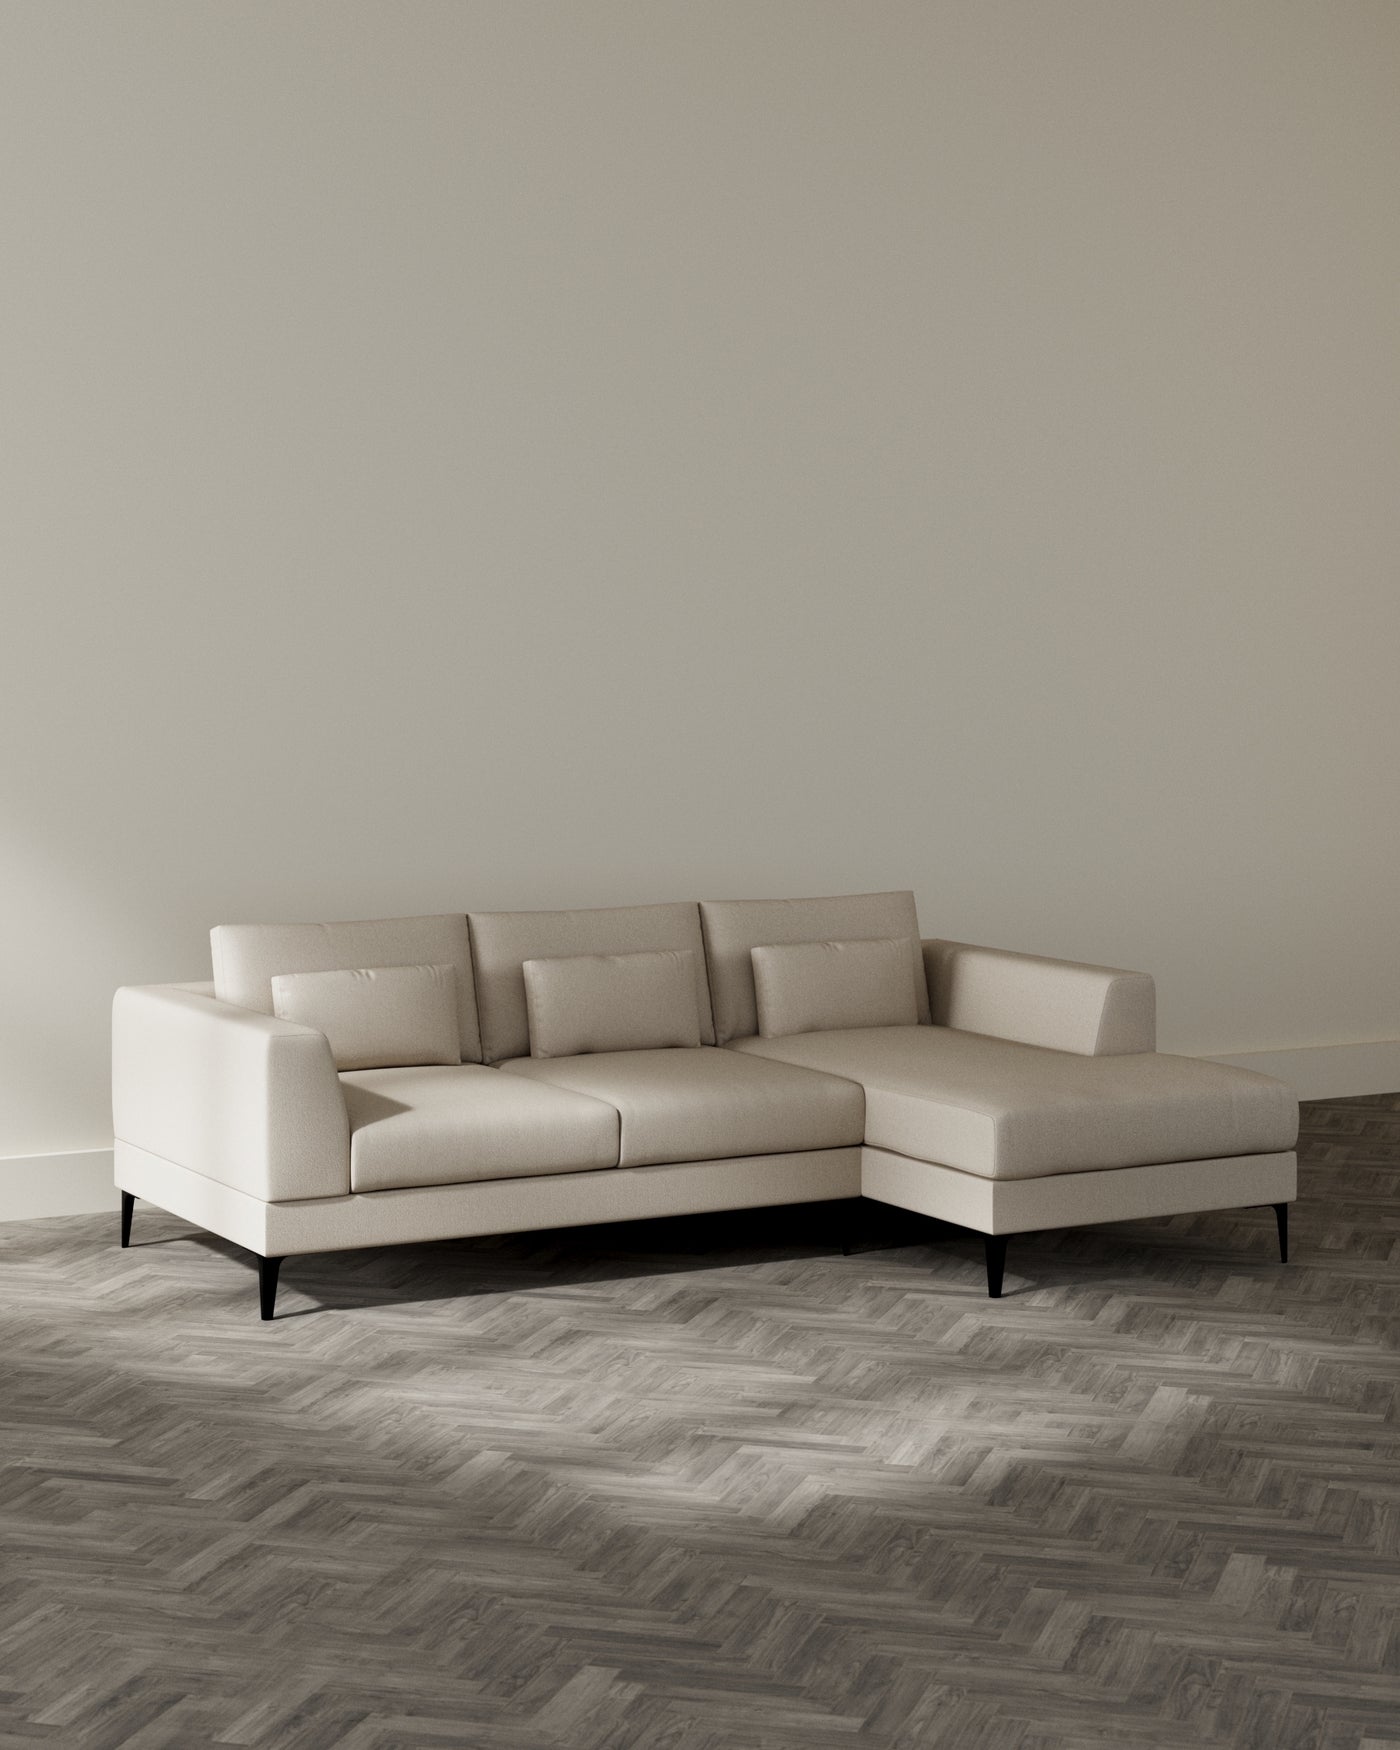 Modern beige sectional sofa with chaise lounge and black tapered legs positioned in a room with herringbone hardwood flooring against a soft grey wall.